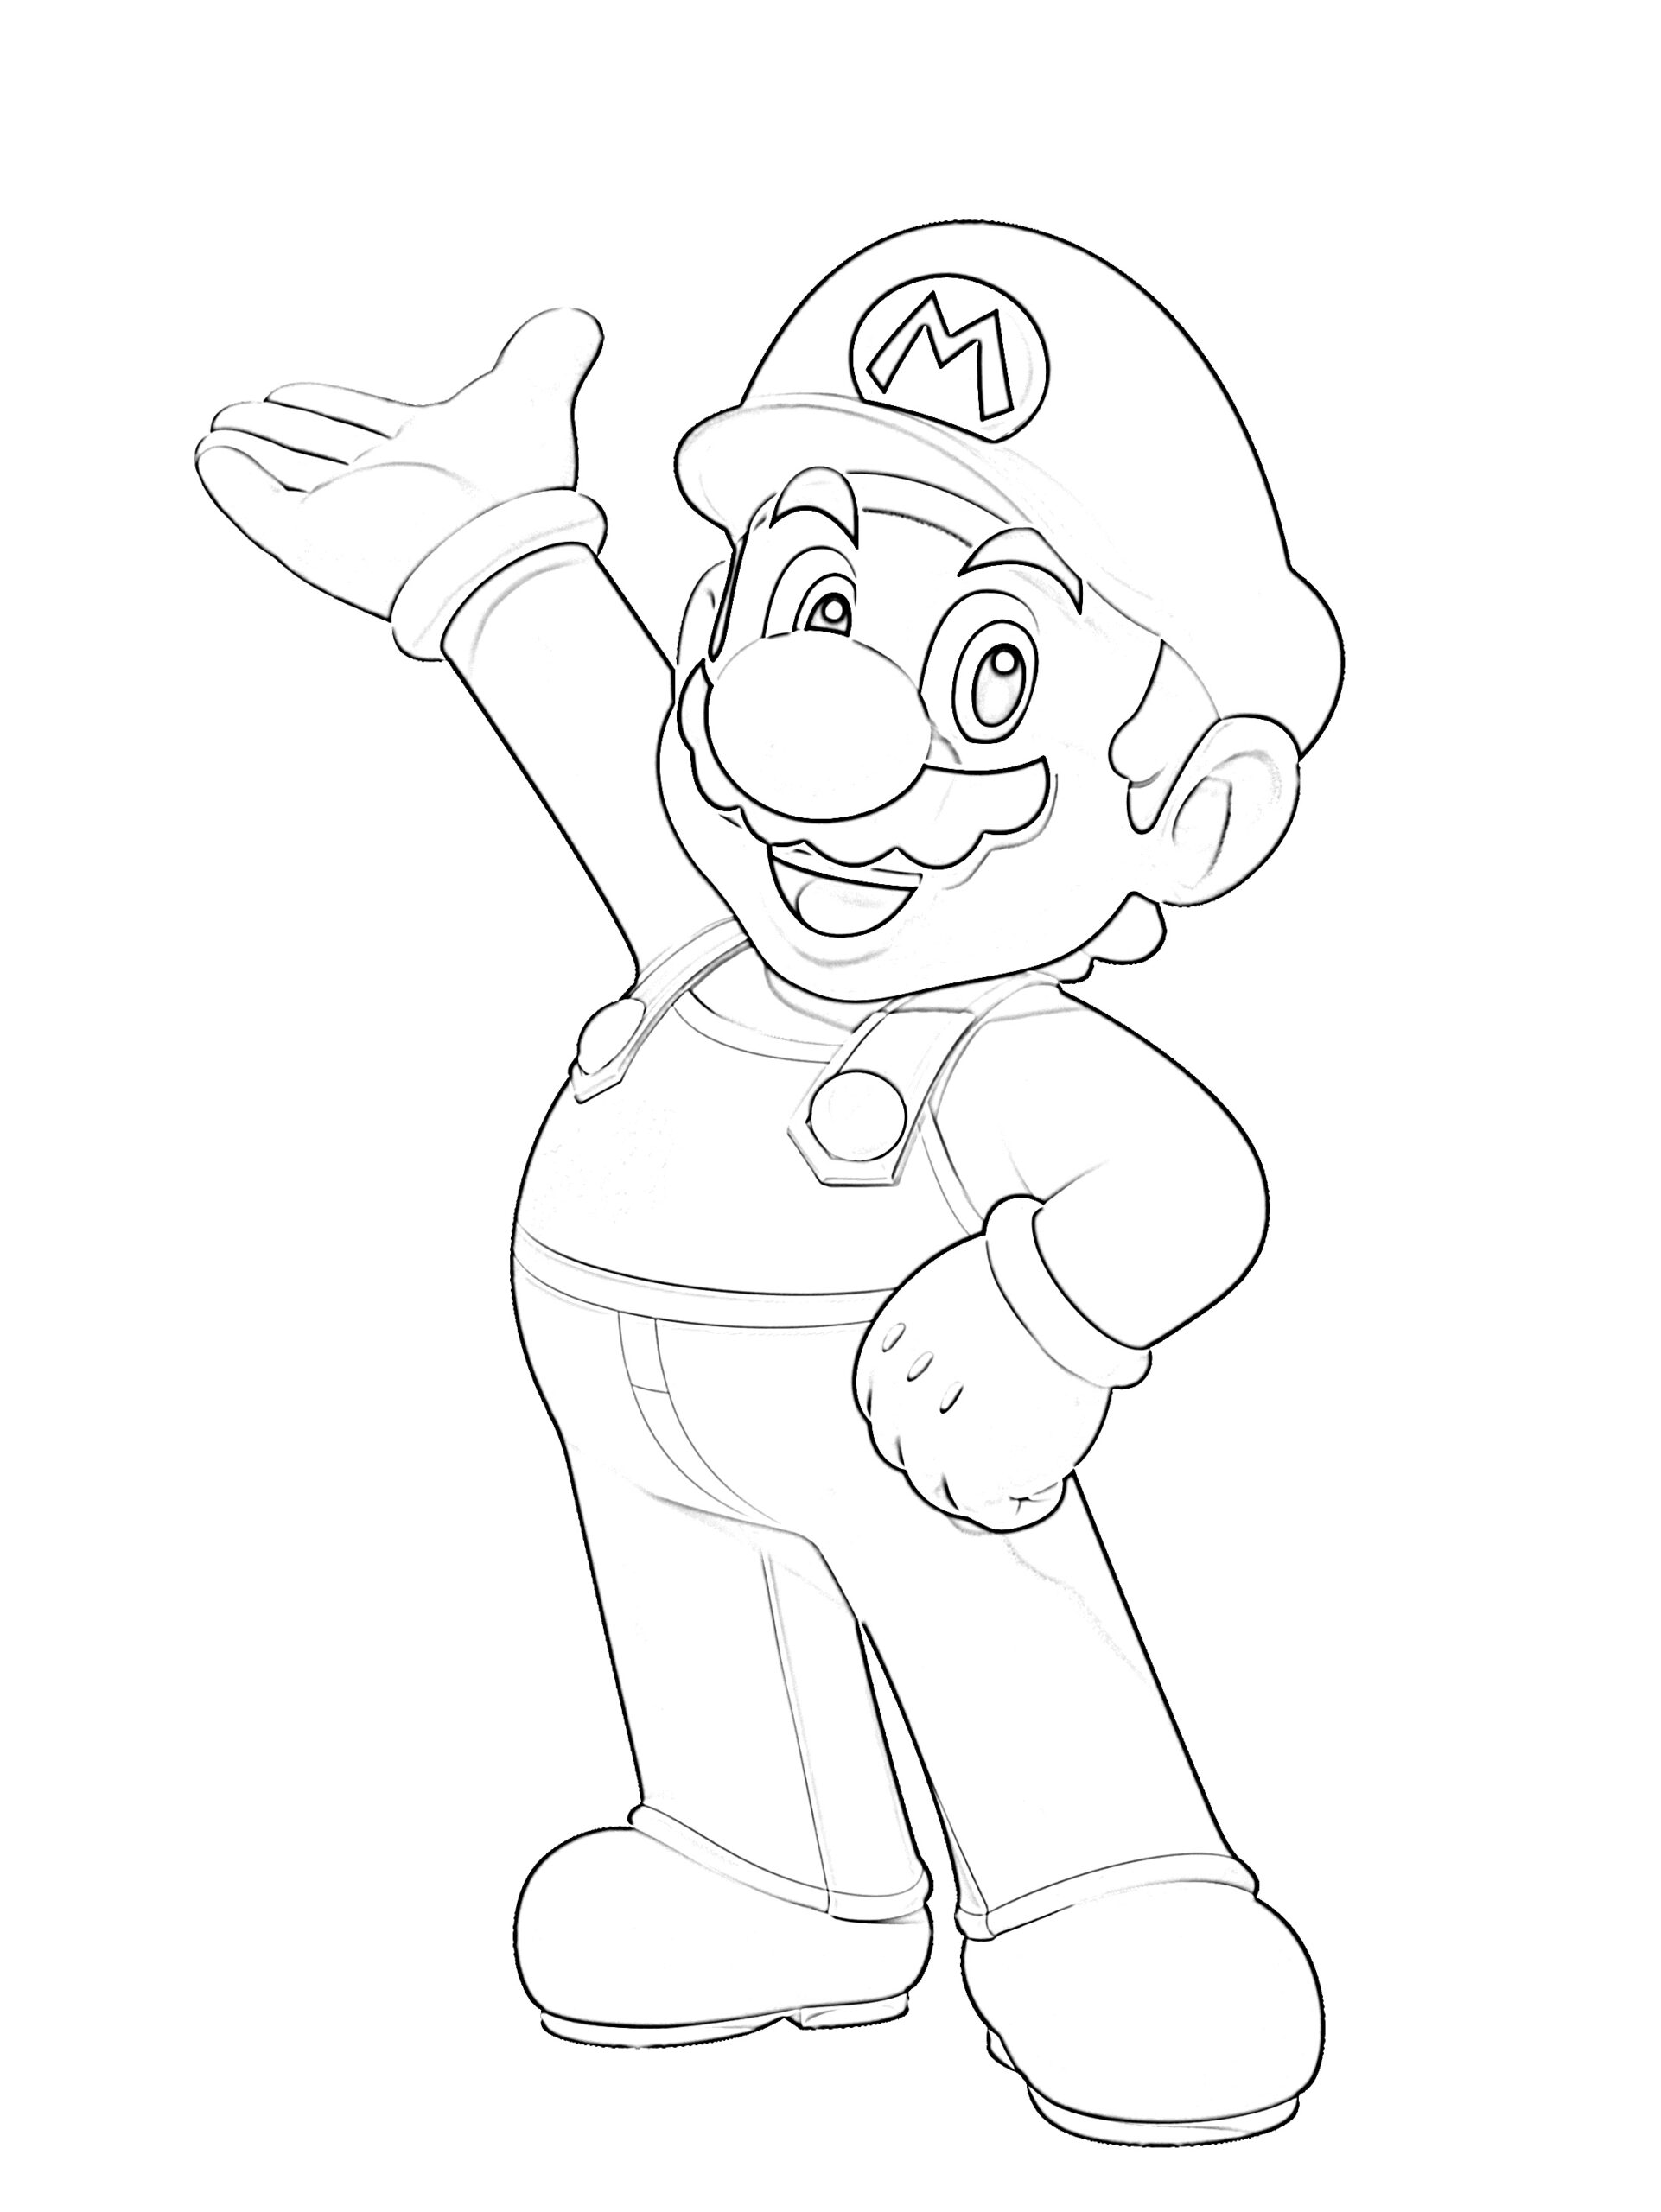 super mario odyssey coloring pages